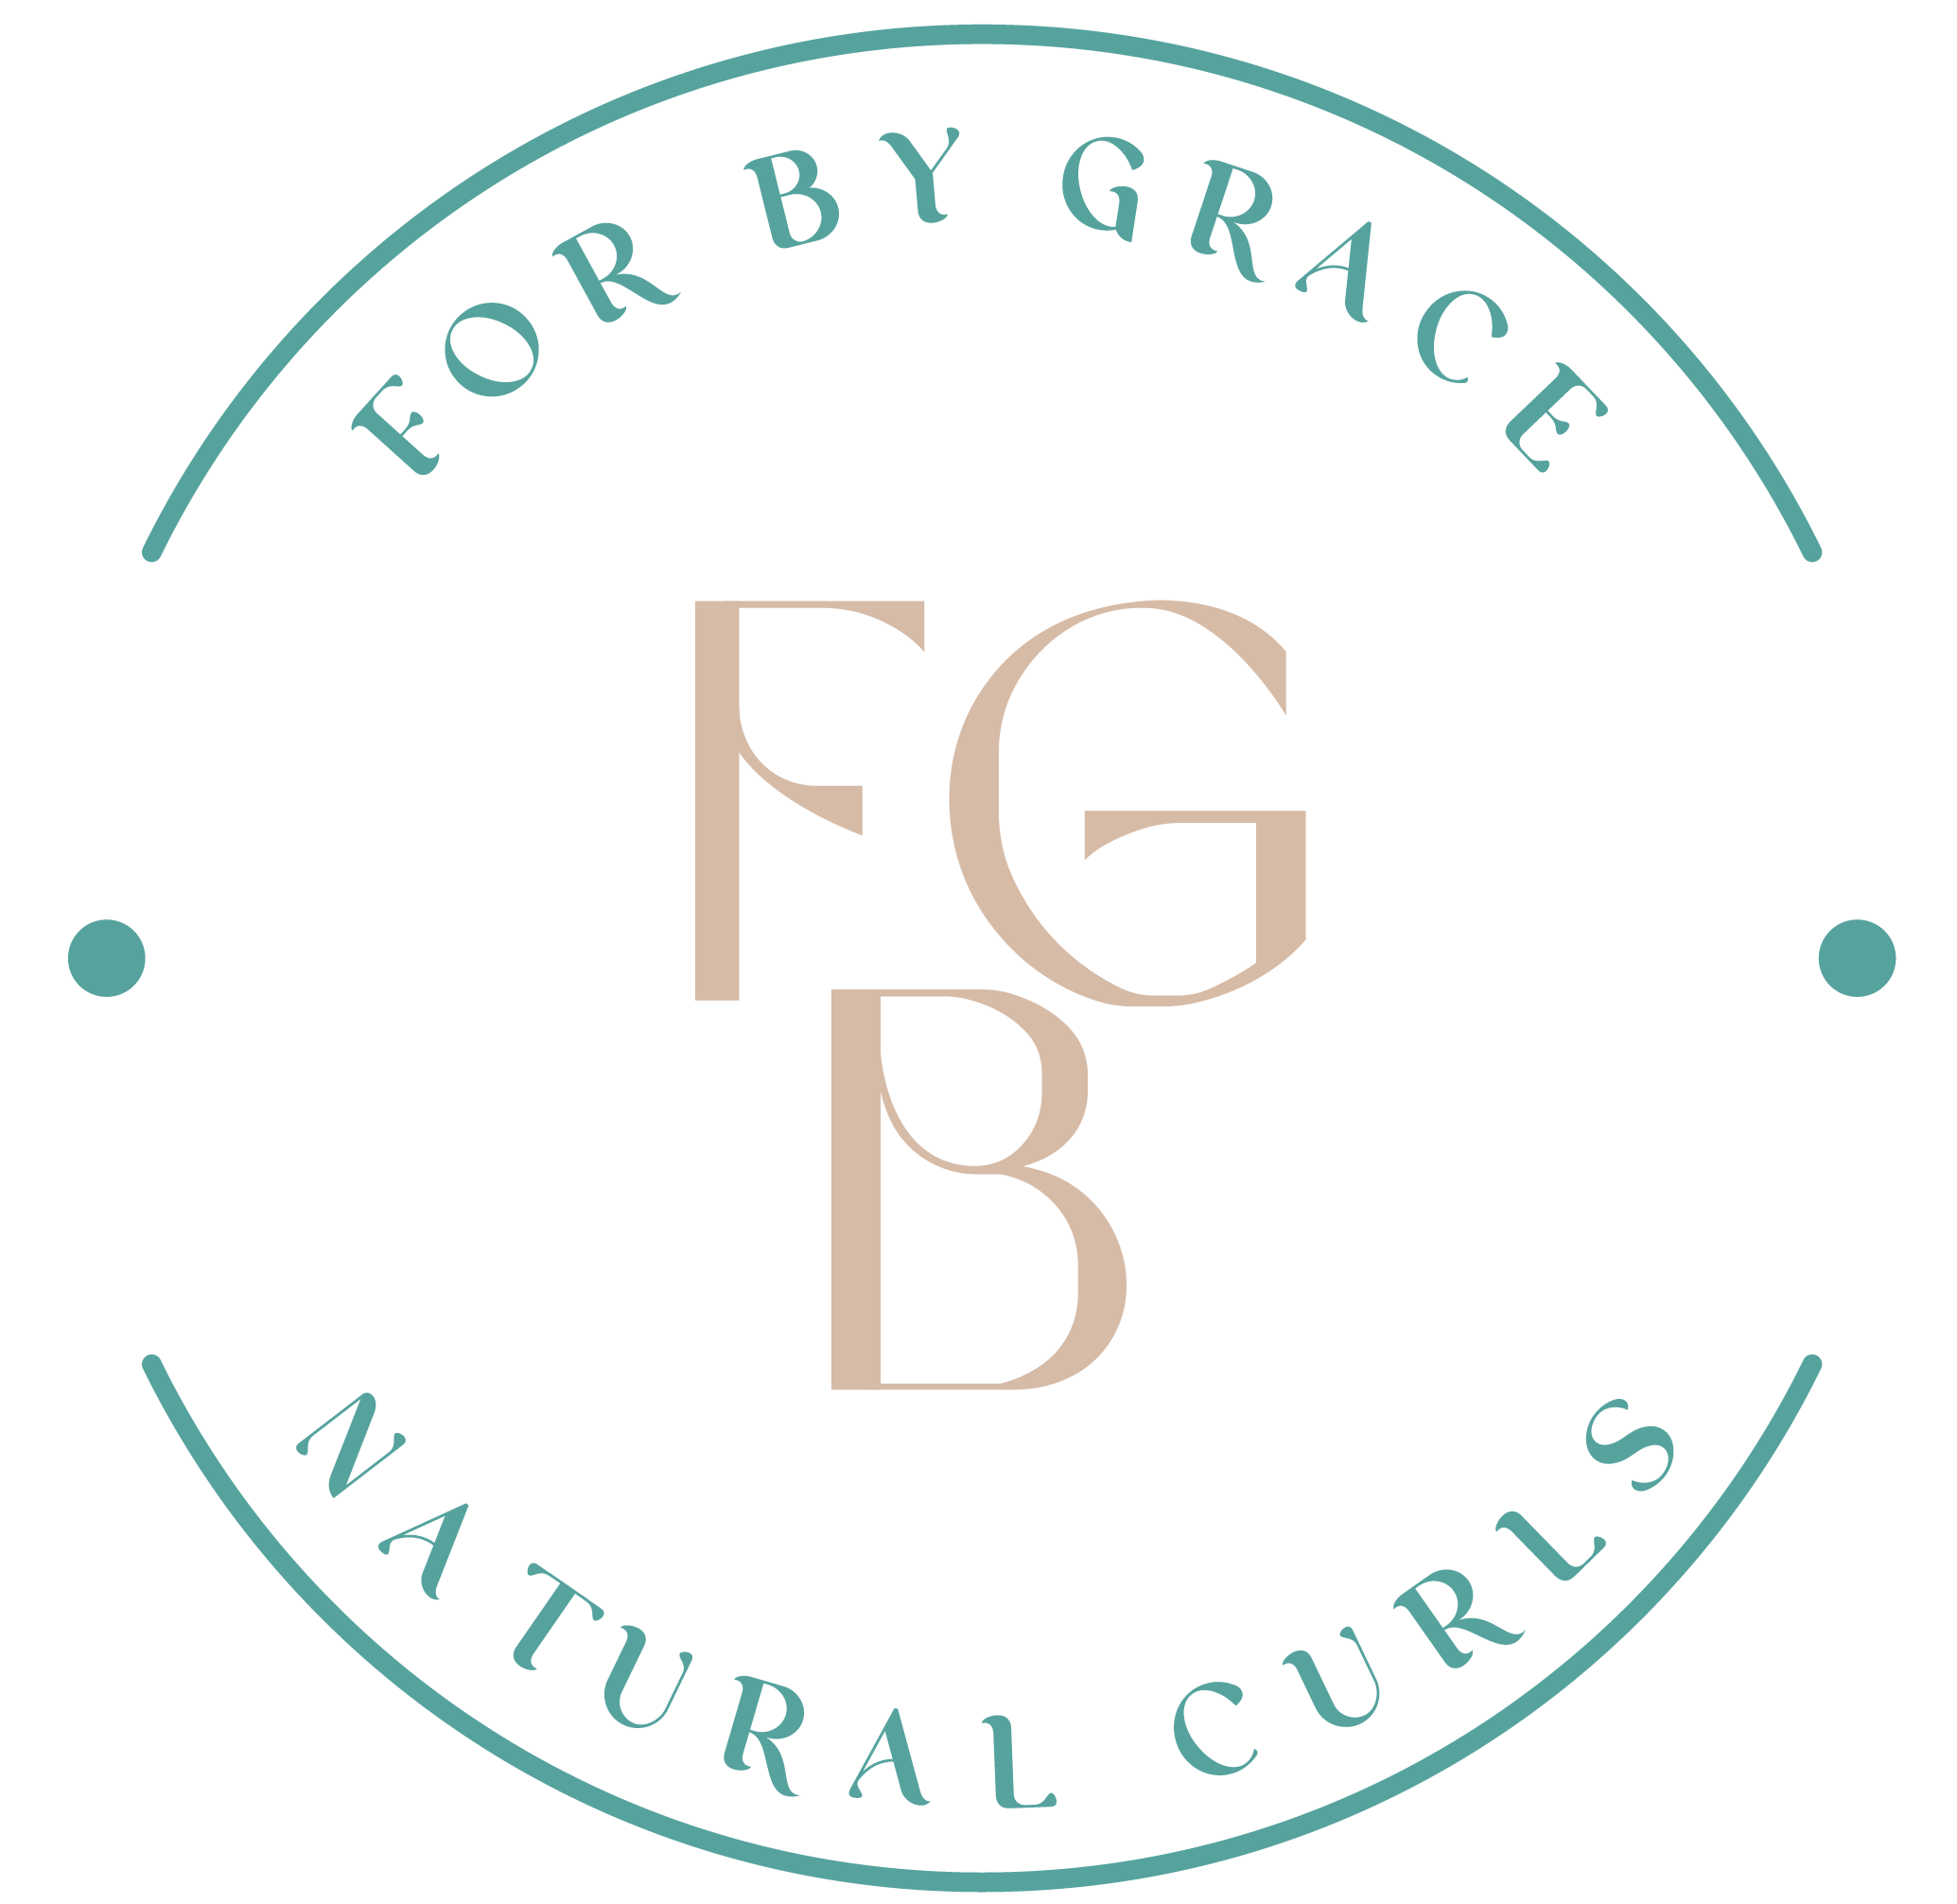 FOR BY GRACE NATURAL CURLS